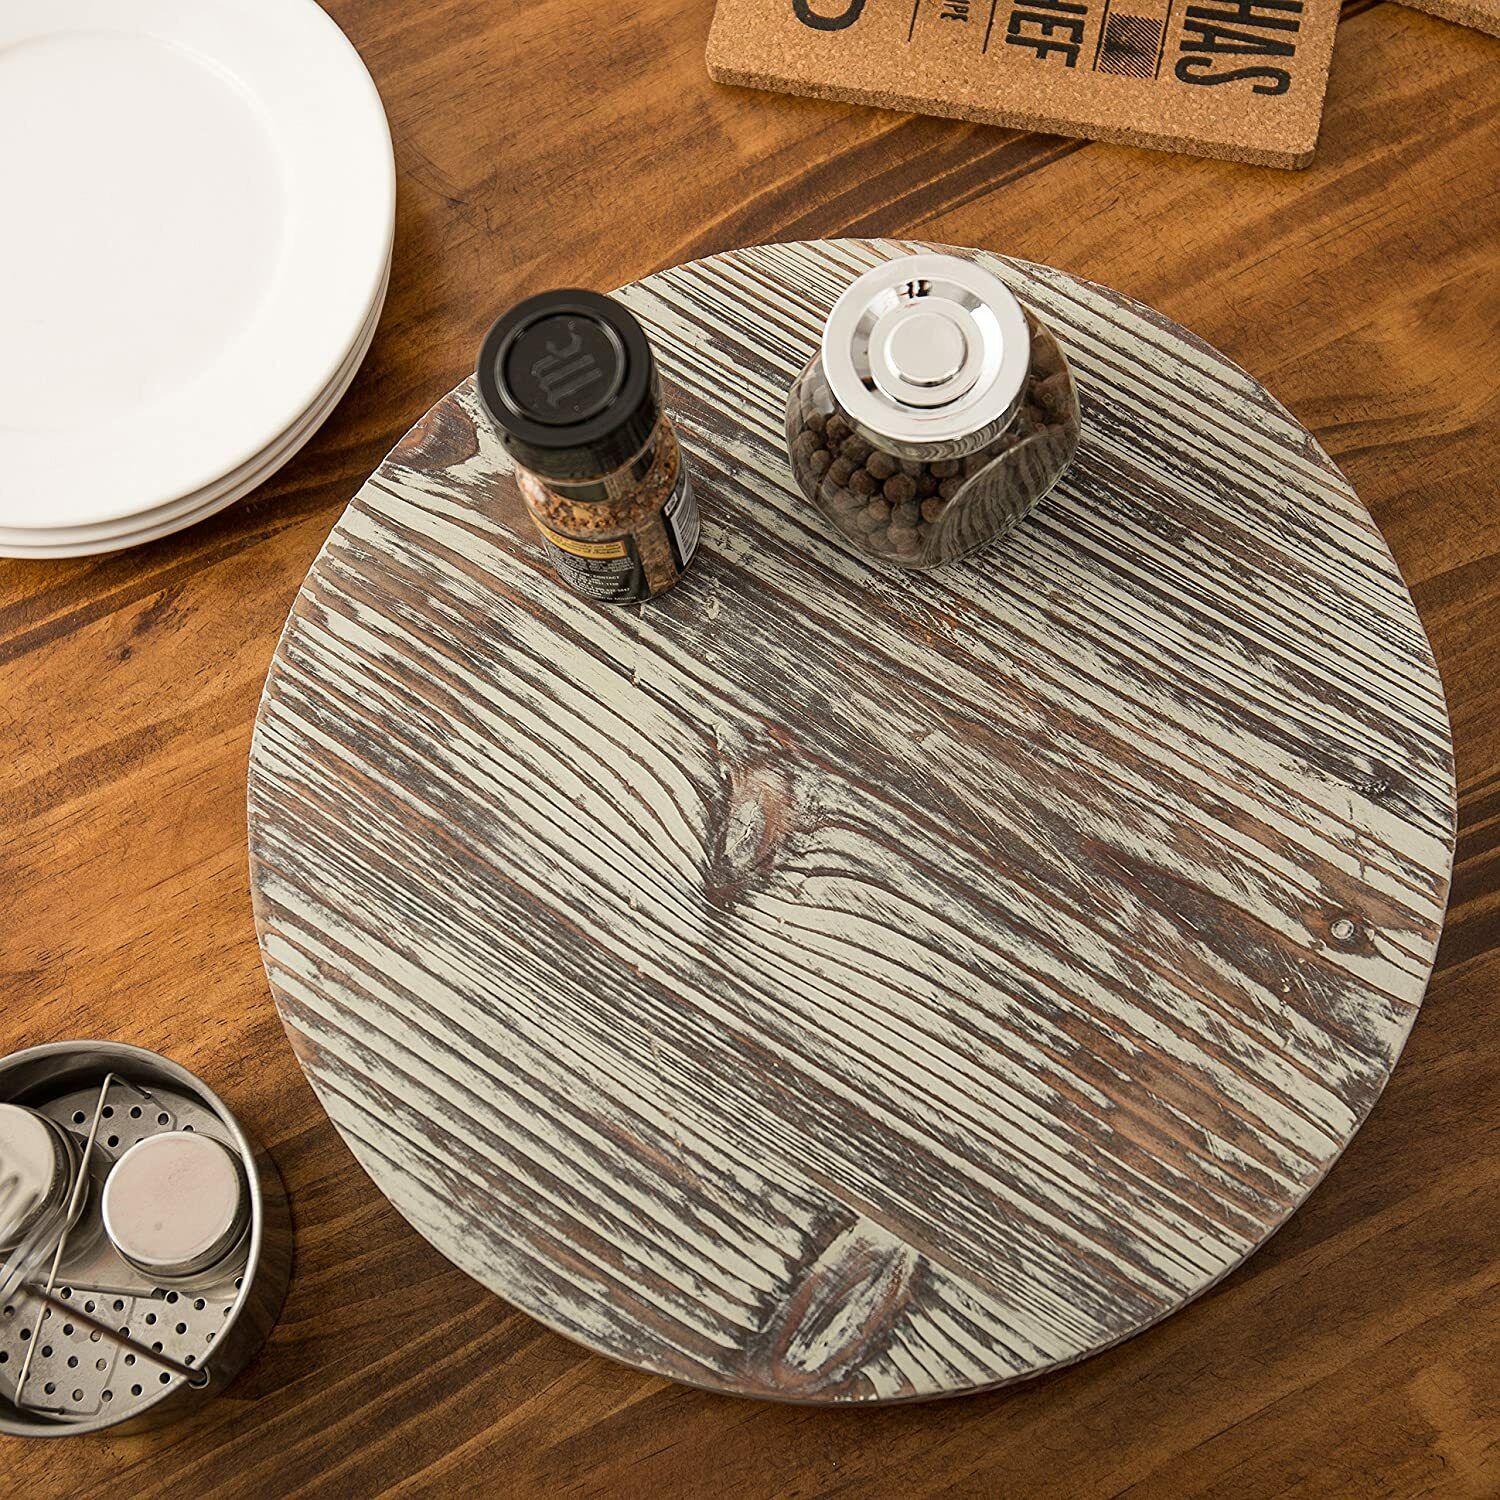 13-Inch Distressed Torched Wood Finish Lazy Susan Turntable w/ Ball-Bearing Base